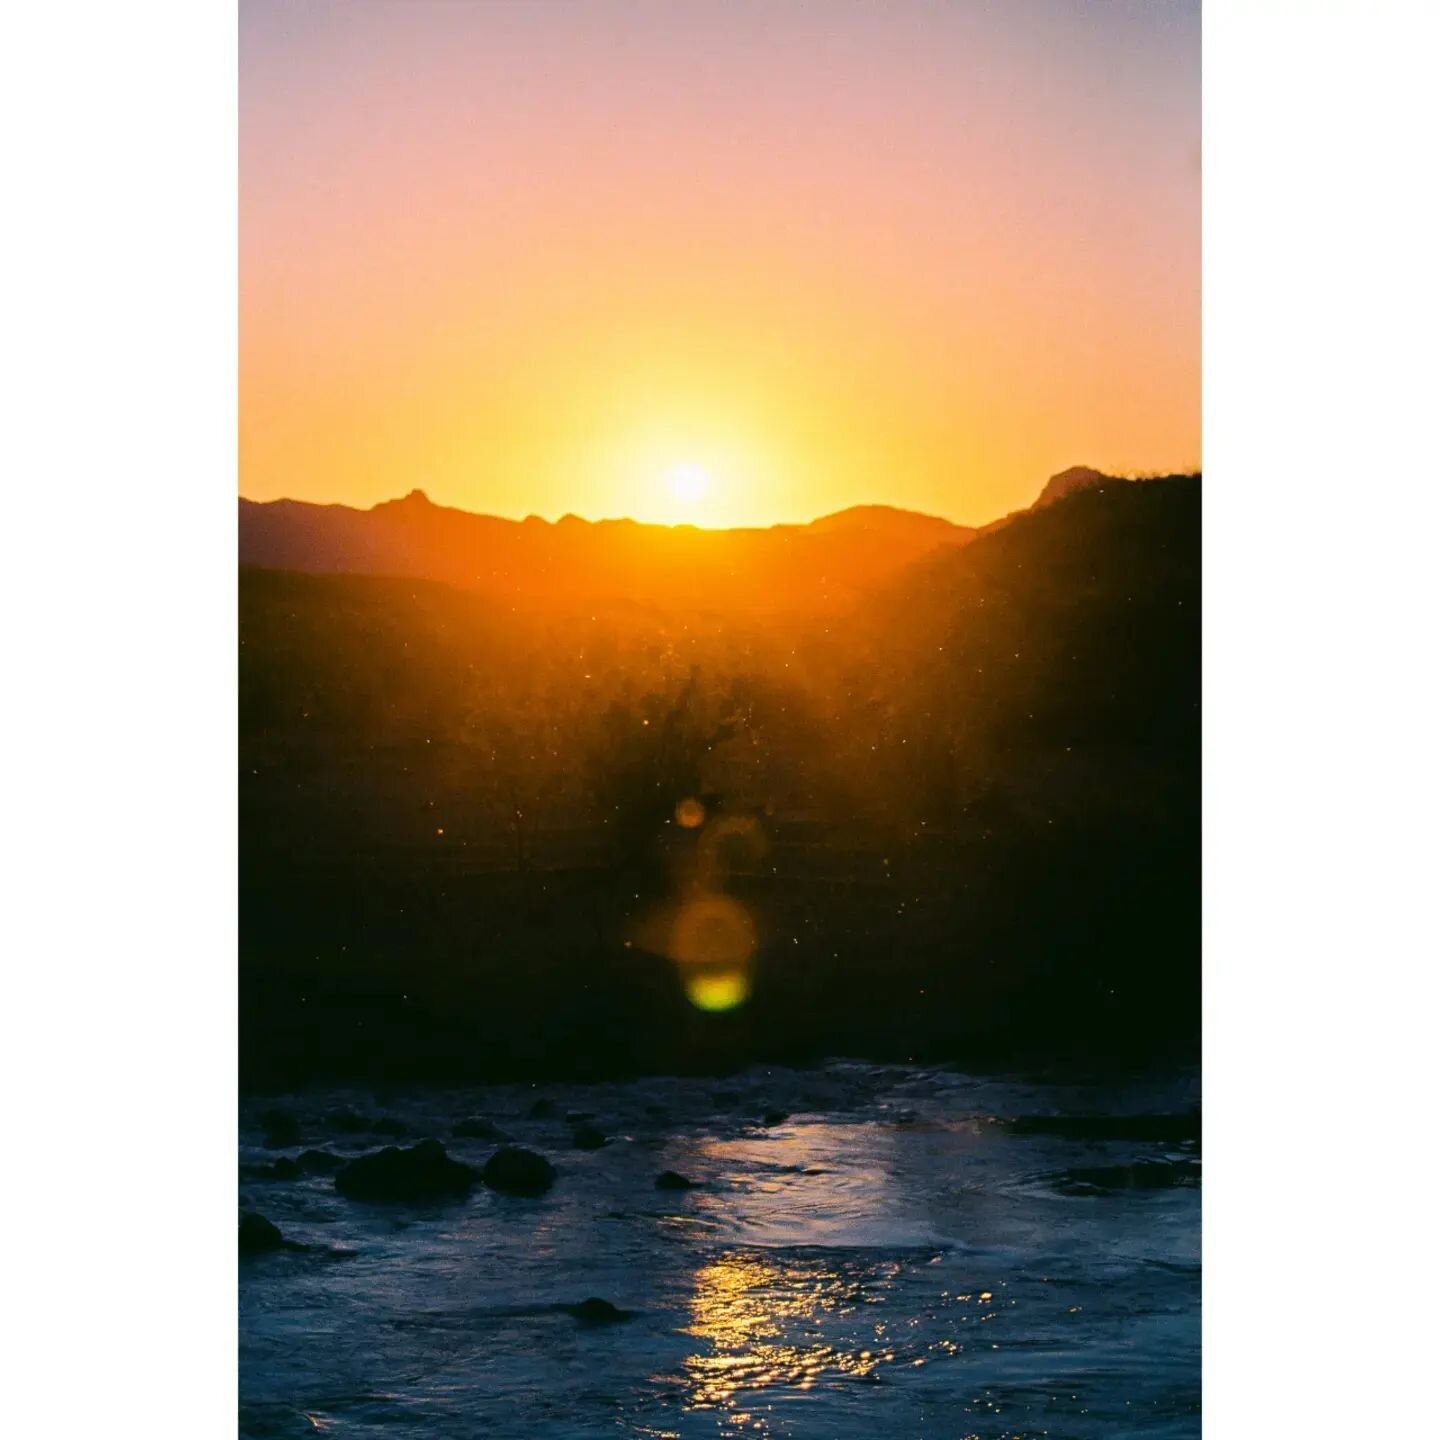 Big Bend Ranch State Park.

That is M&eacute;xico on the other side. That is not dust on my lens.

#35mm #35mmfilm #analog #analogfilm #film #filmphotography #outside #sunrise #bigbend #ektar100 #kodak #camping #hiking #canon